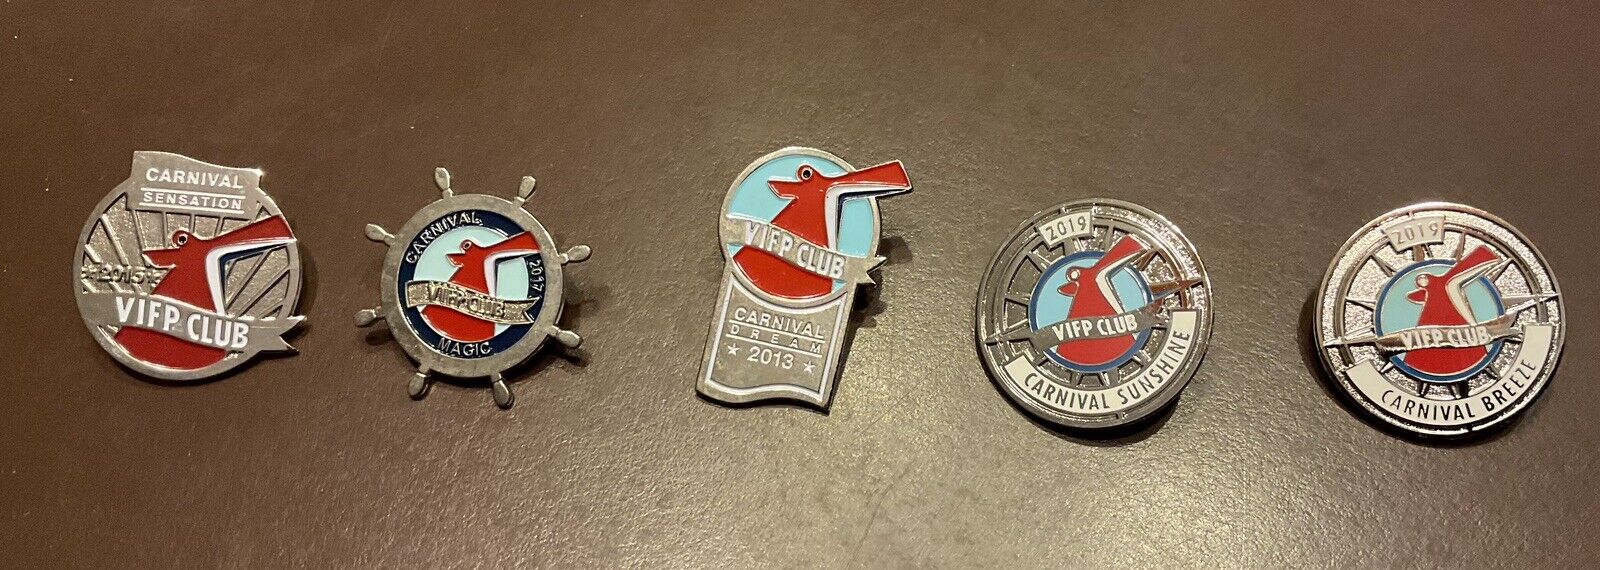 CARNIVAL CRUISE LINES SHIP PINS- Slightly Used